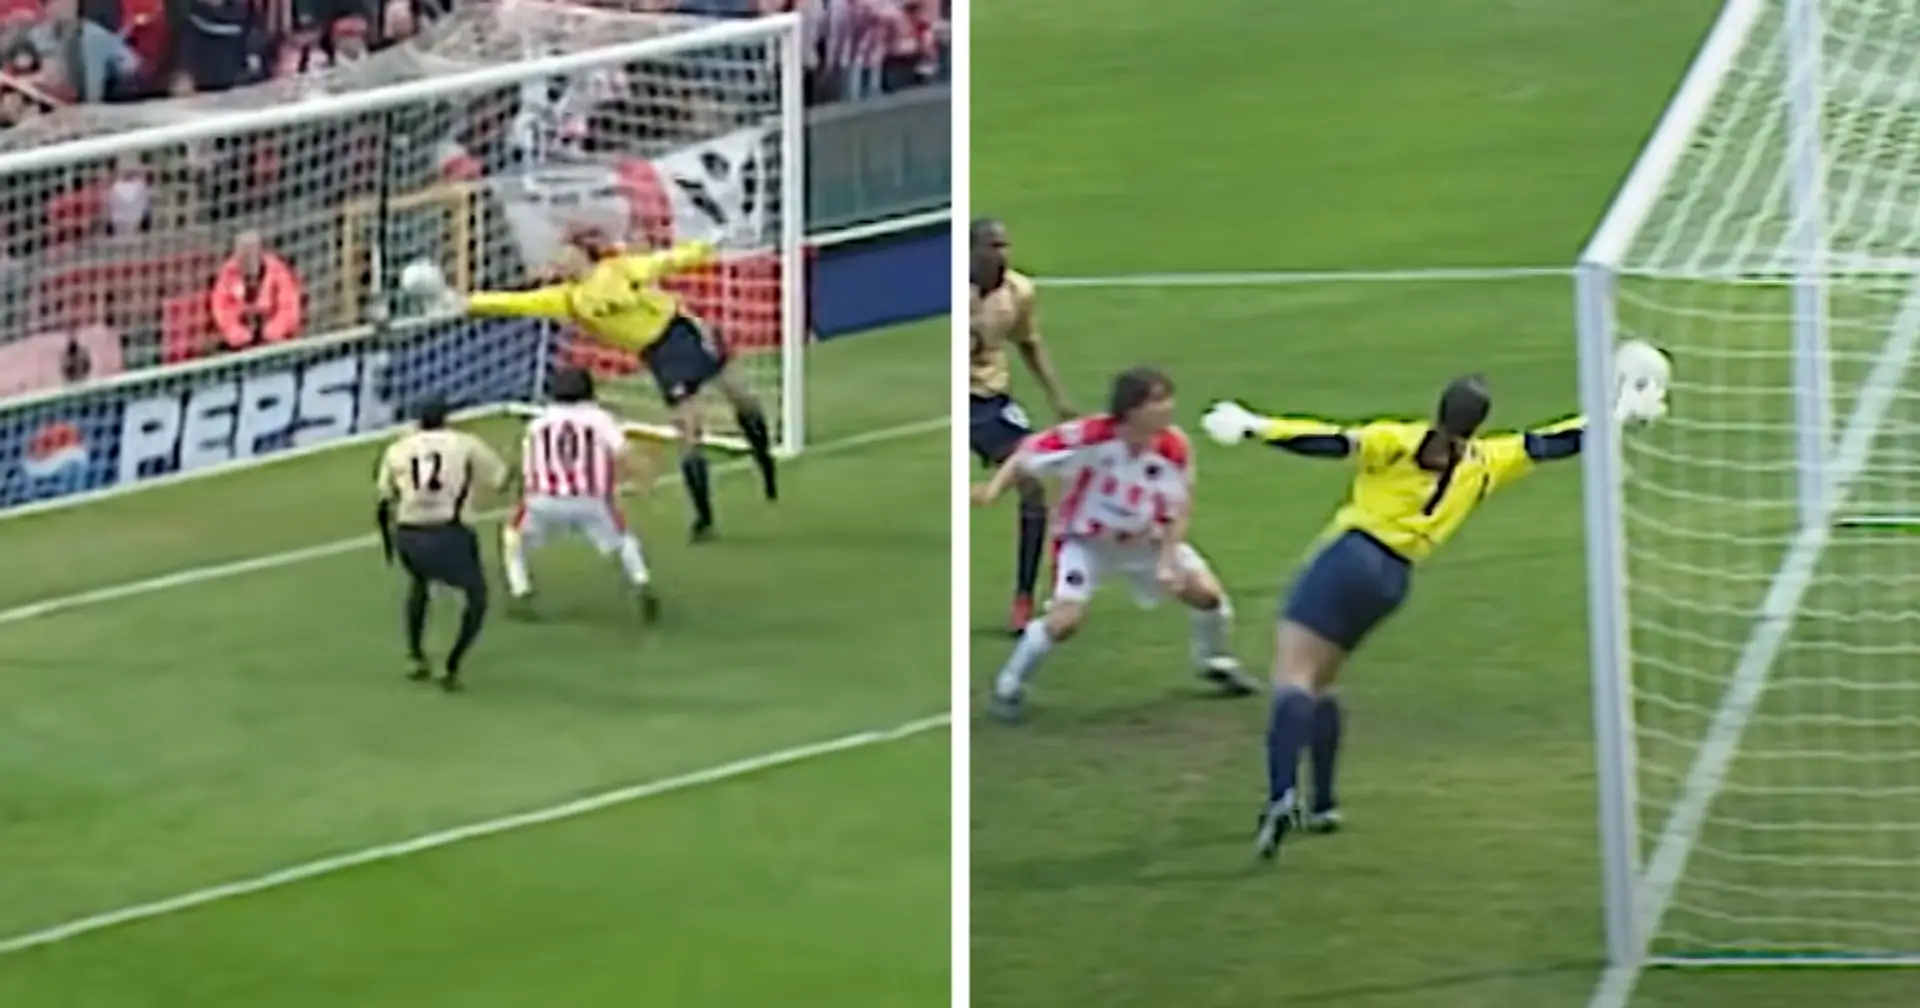 21 years ago today: Seaman produced possibly the greatest save in football history